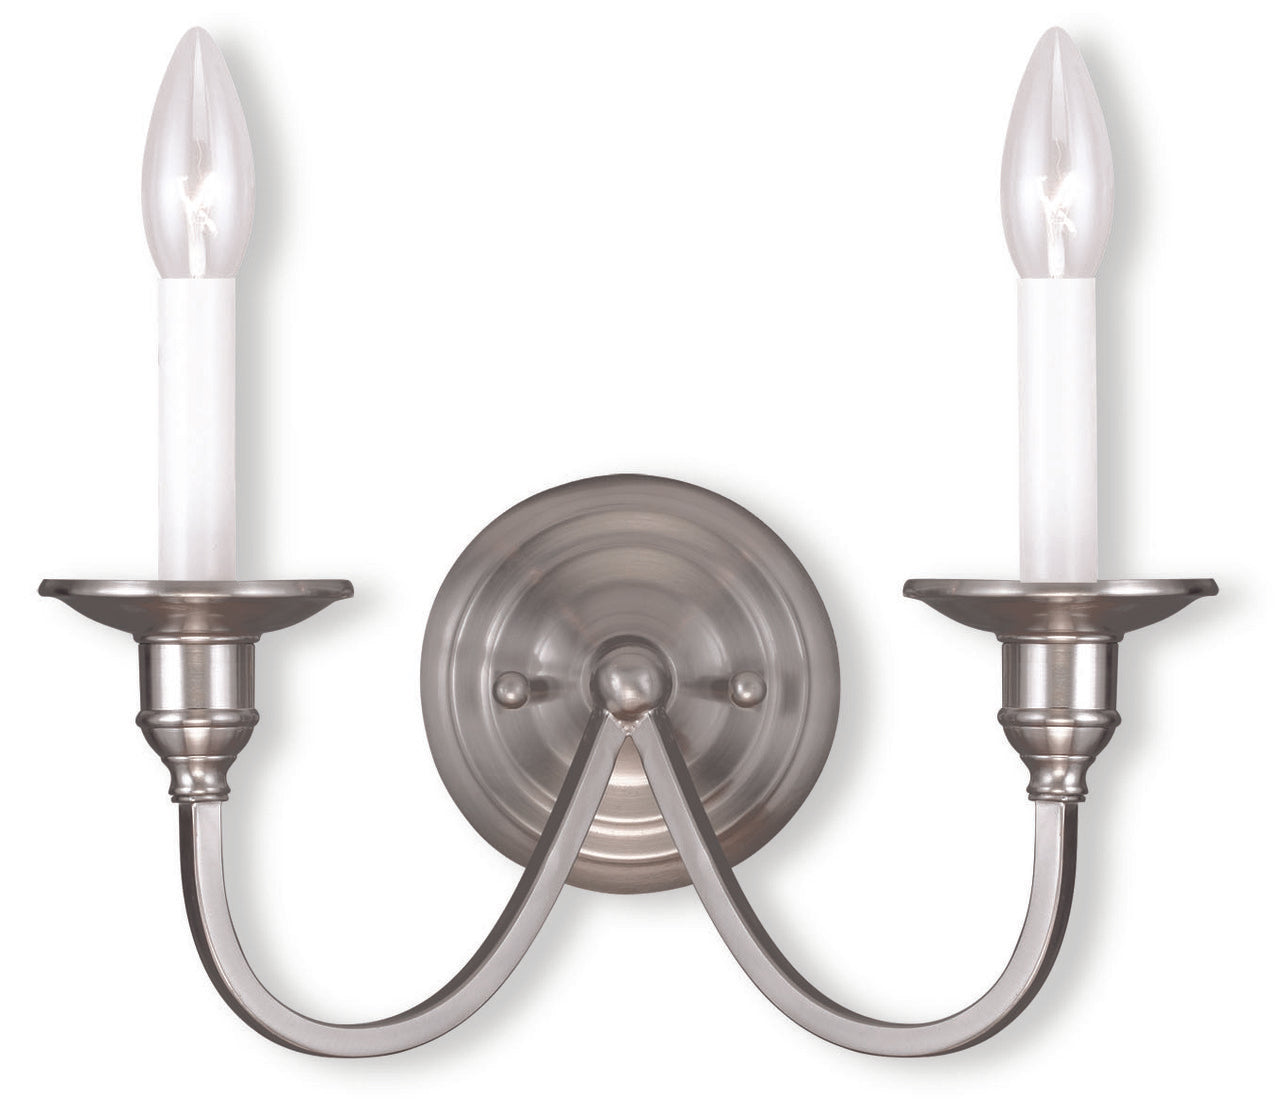 LIVEX Lighting 5142-91 Cranford Wall Sconce in Brushed Nickel (2 Light)